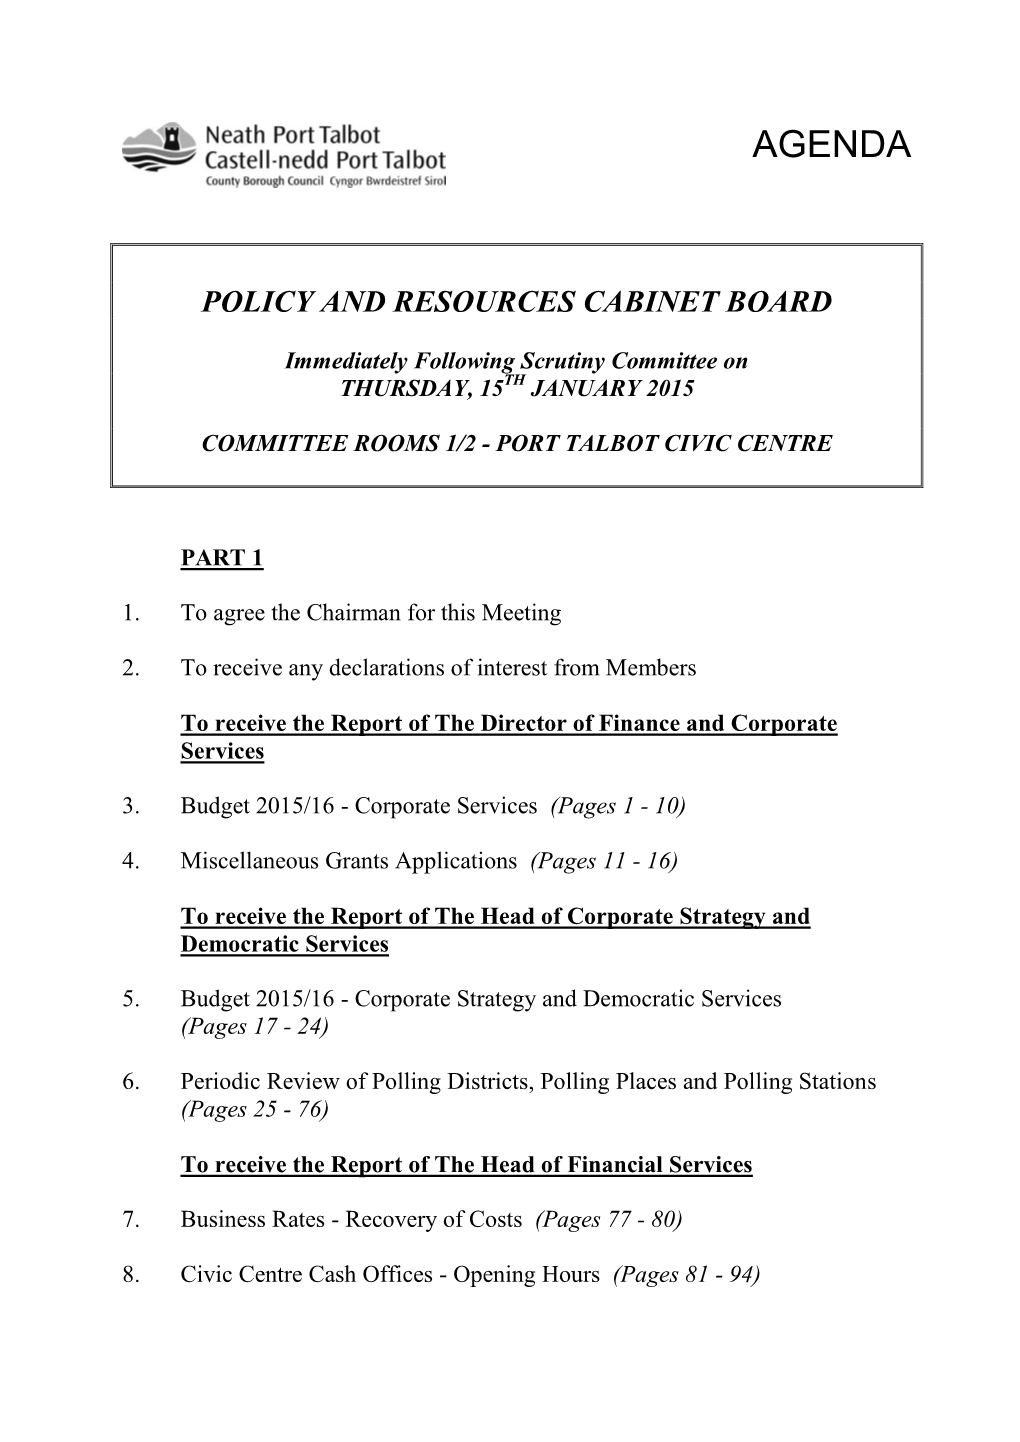 (Public Pack)Agenda Document for Policy and Resources Cabinet